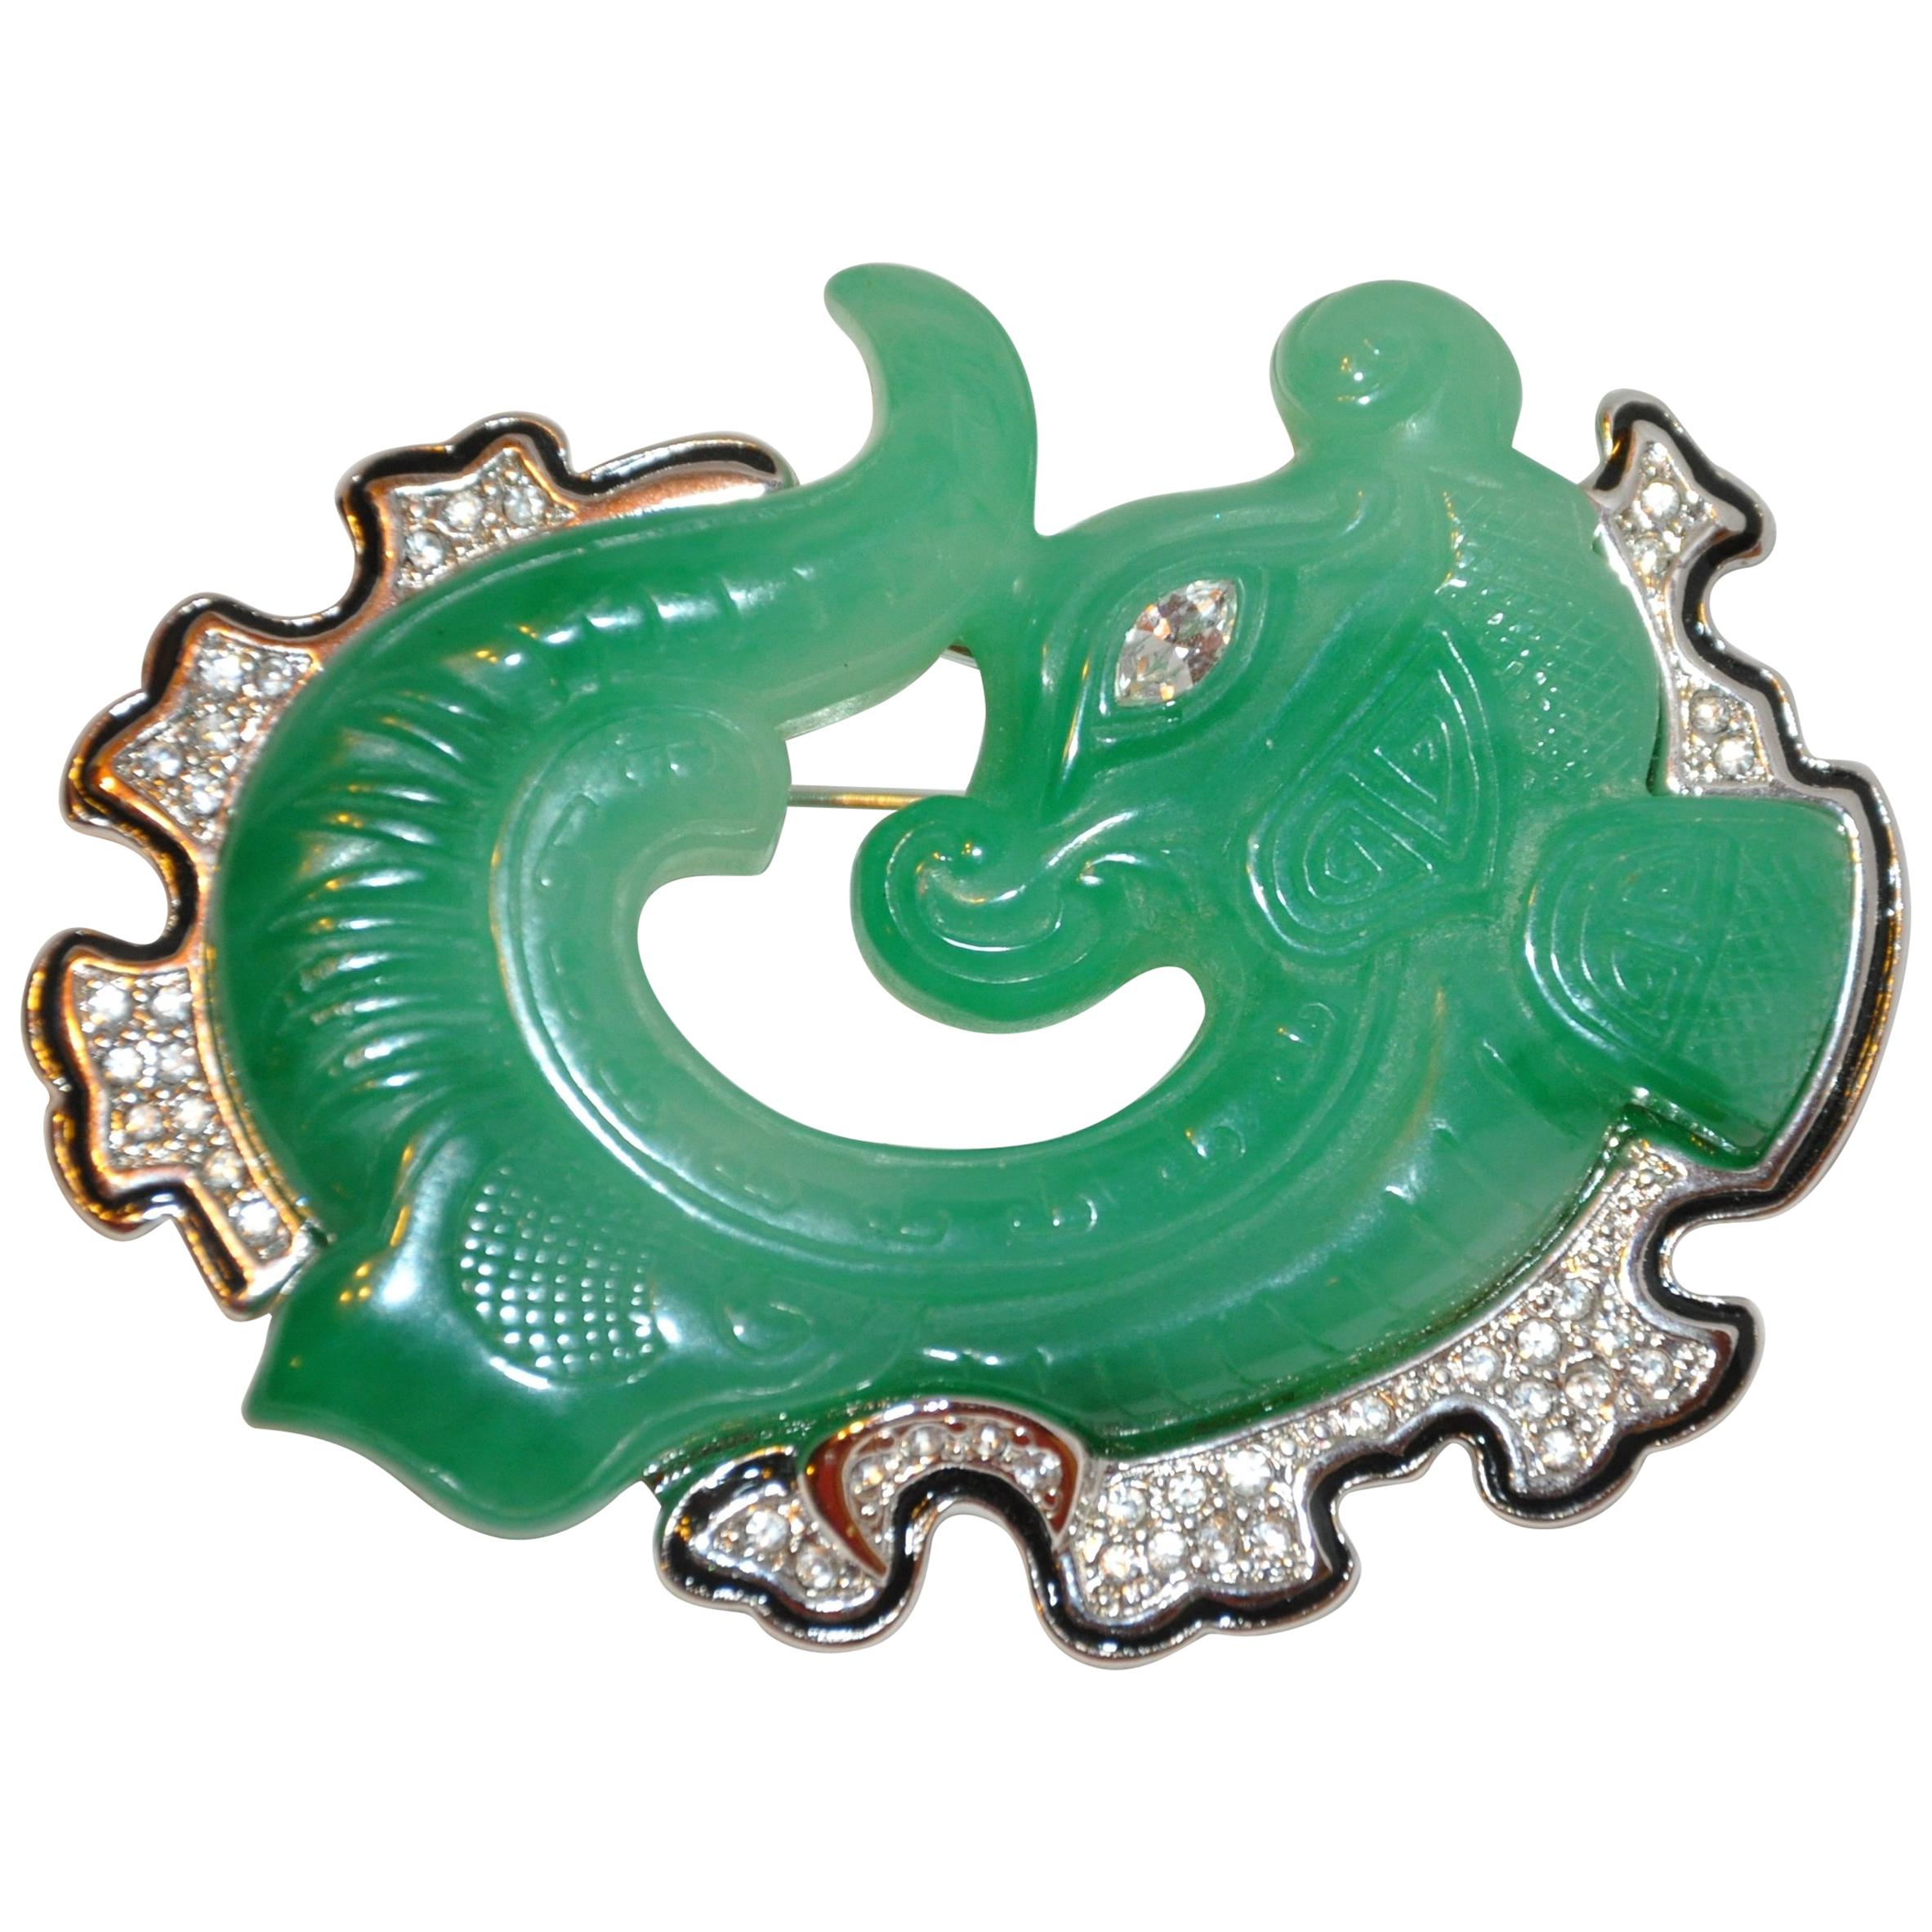 Kenneth Jay Lane "Asian Inspired" Faux "Jadeite Dragon" & Faux Diamonds Brooch For Sale